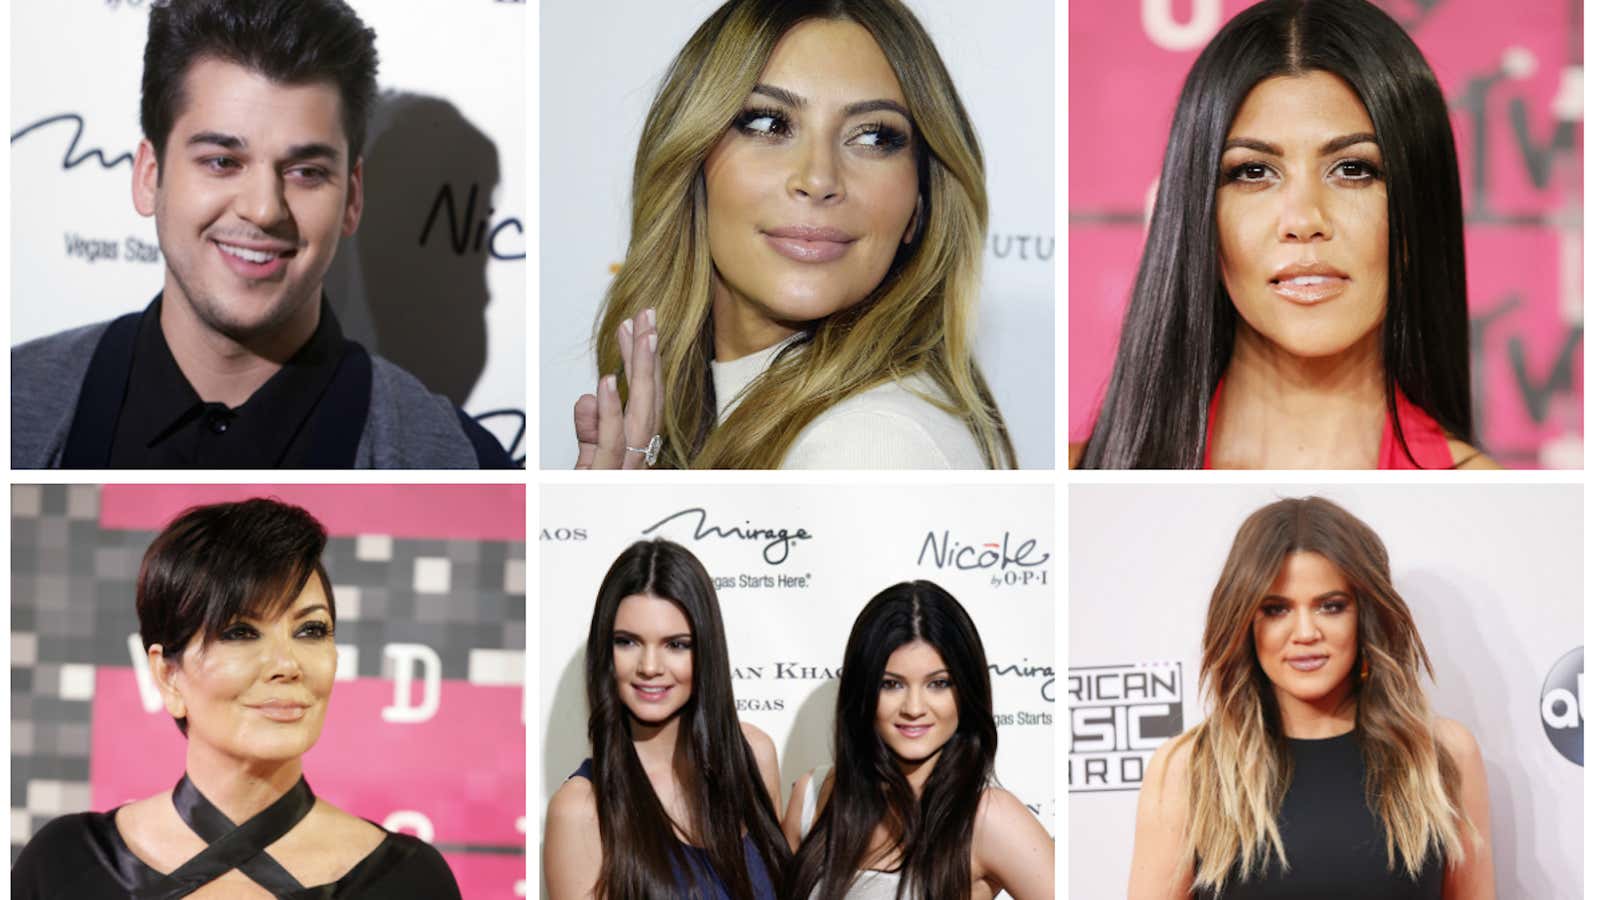 That’s the way they became the Kardashian bunch.